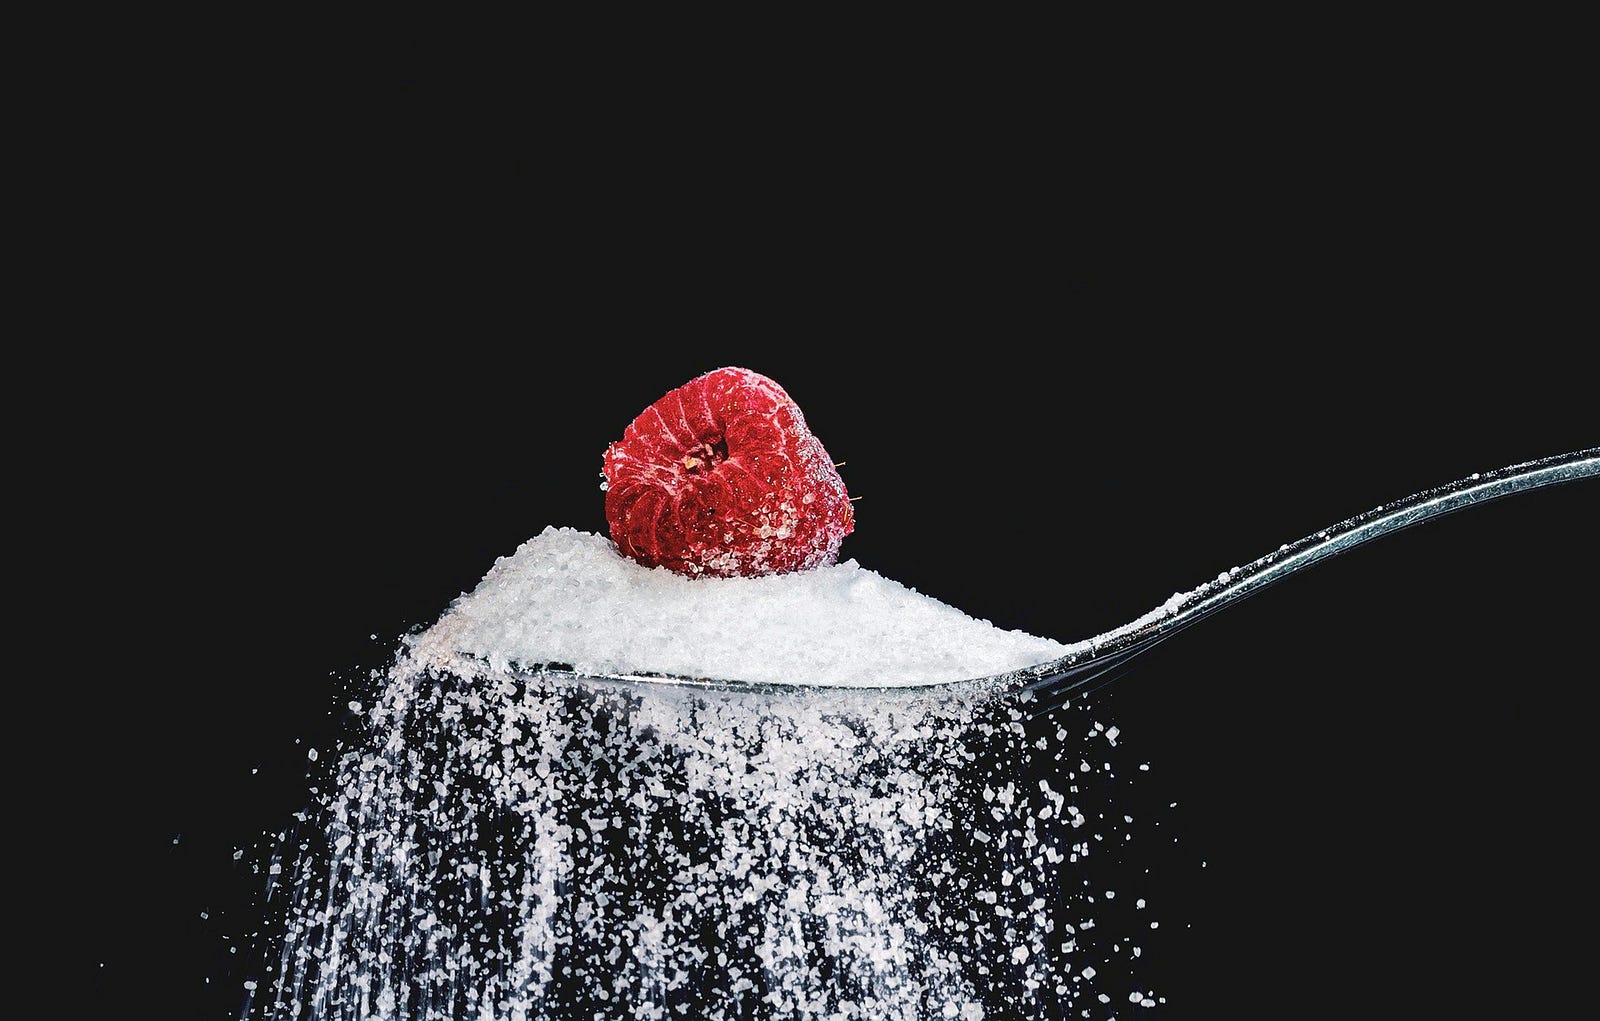 A heaping spoon of sugar (spilling over the sides) with a raspberry on top.